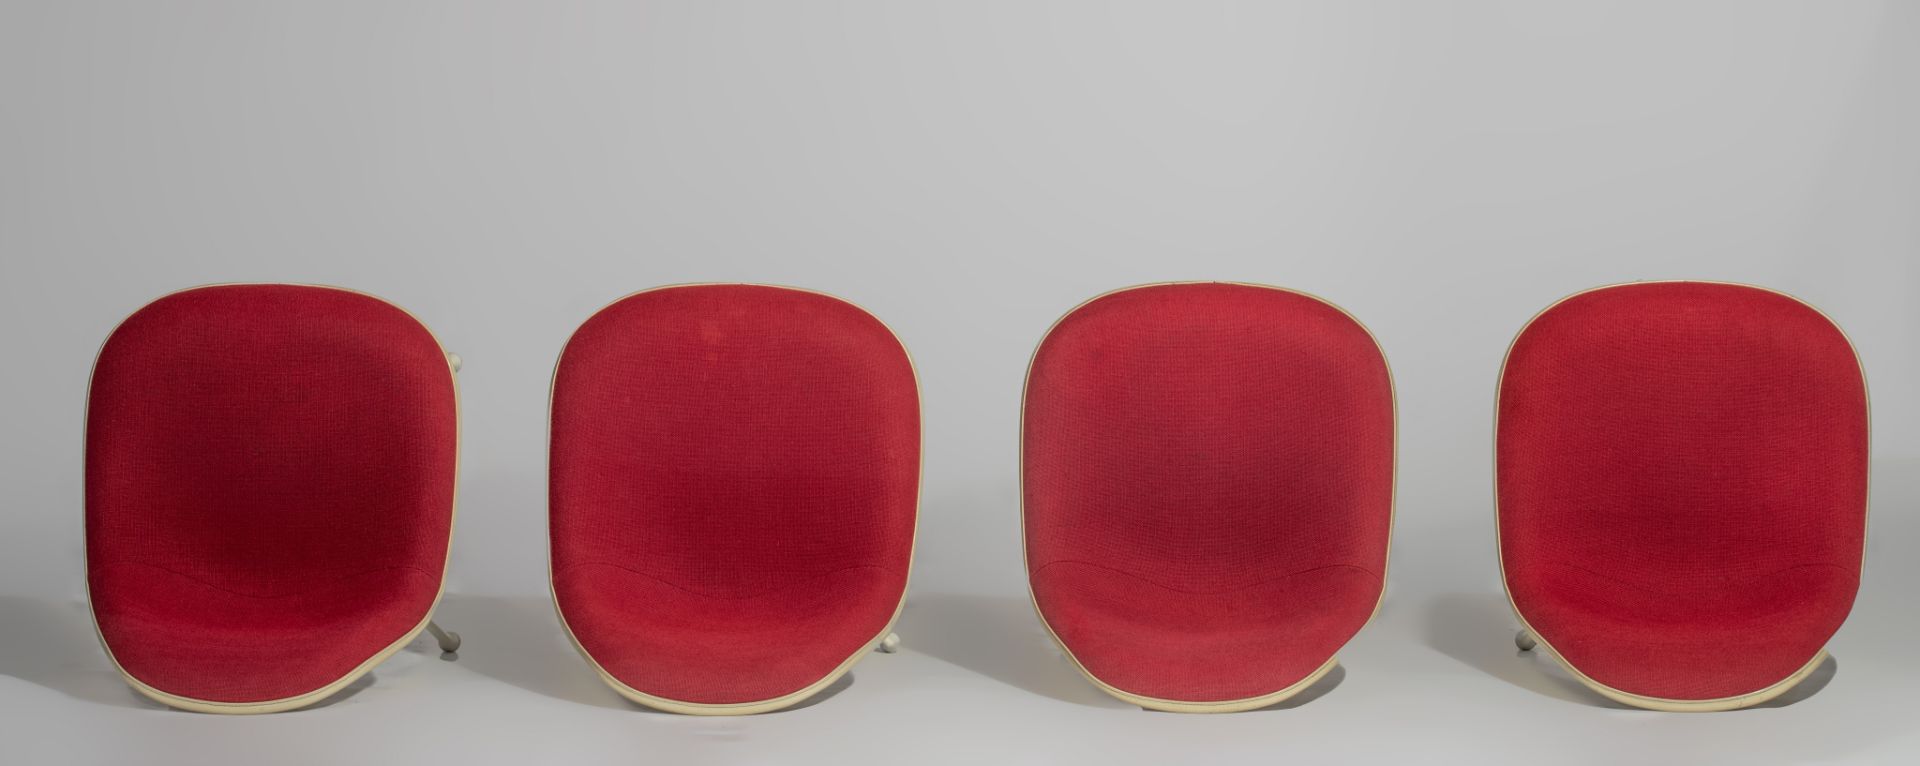 An exceptional set of 4 Eames fibreglass DSL chairs for Vitra, H 71 - W 48 cm - Image 6 of 9